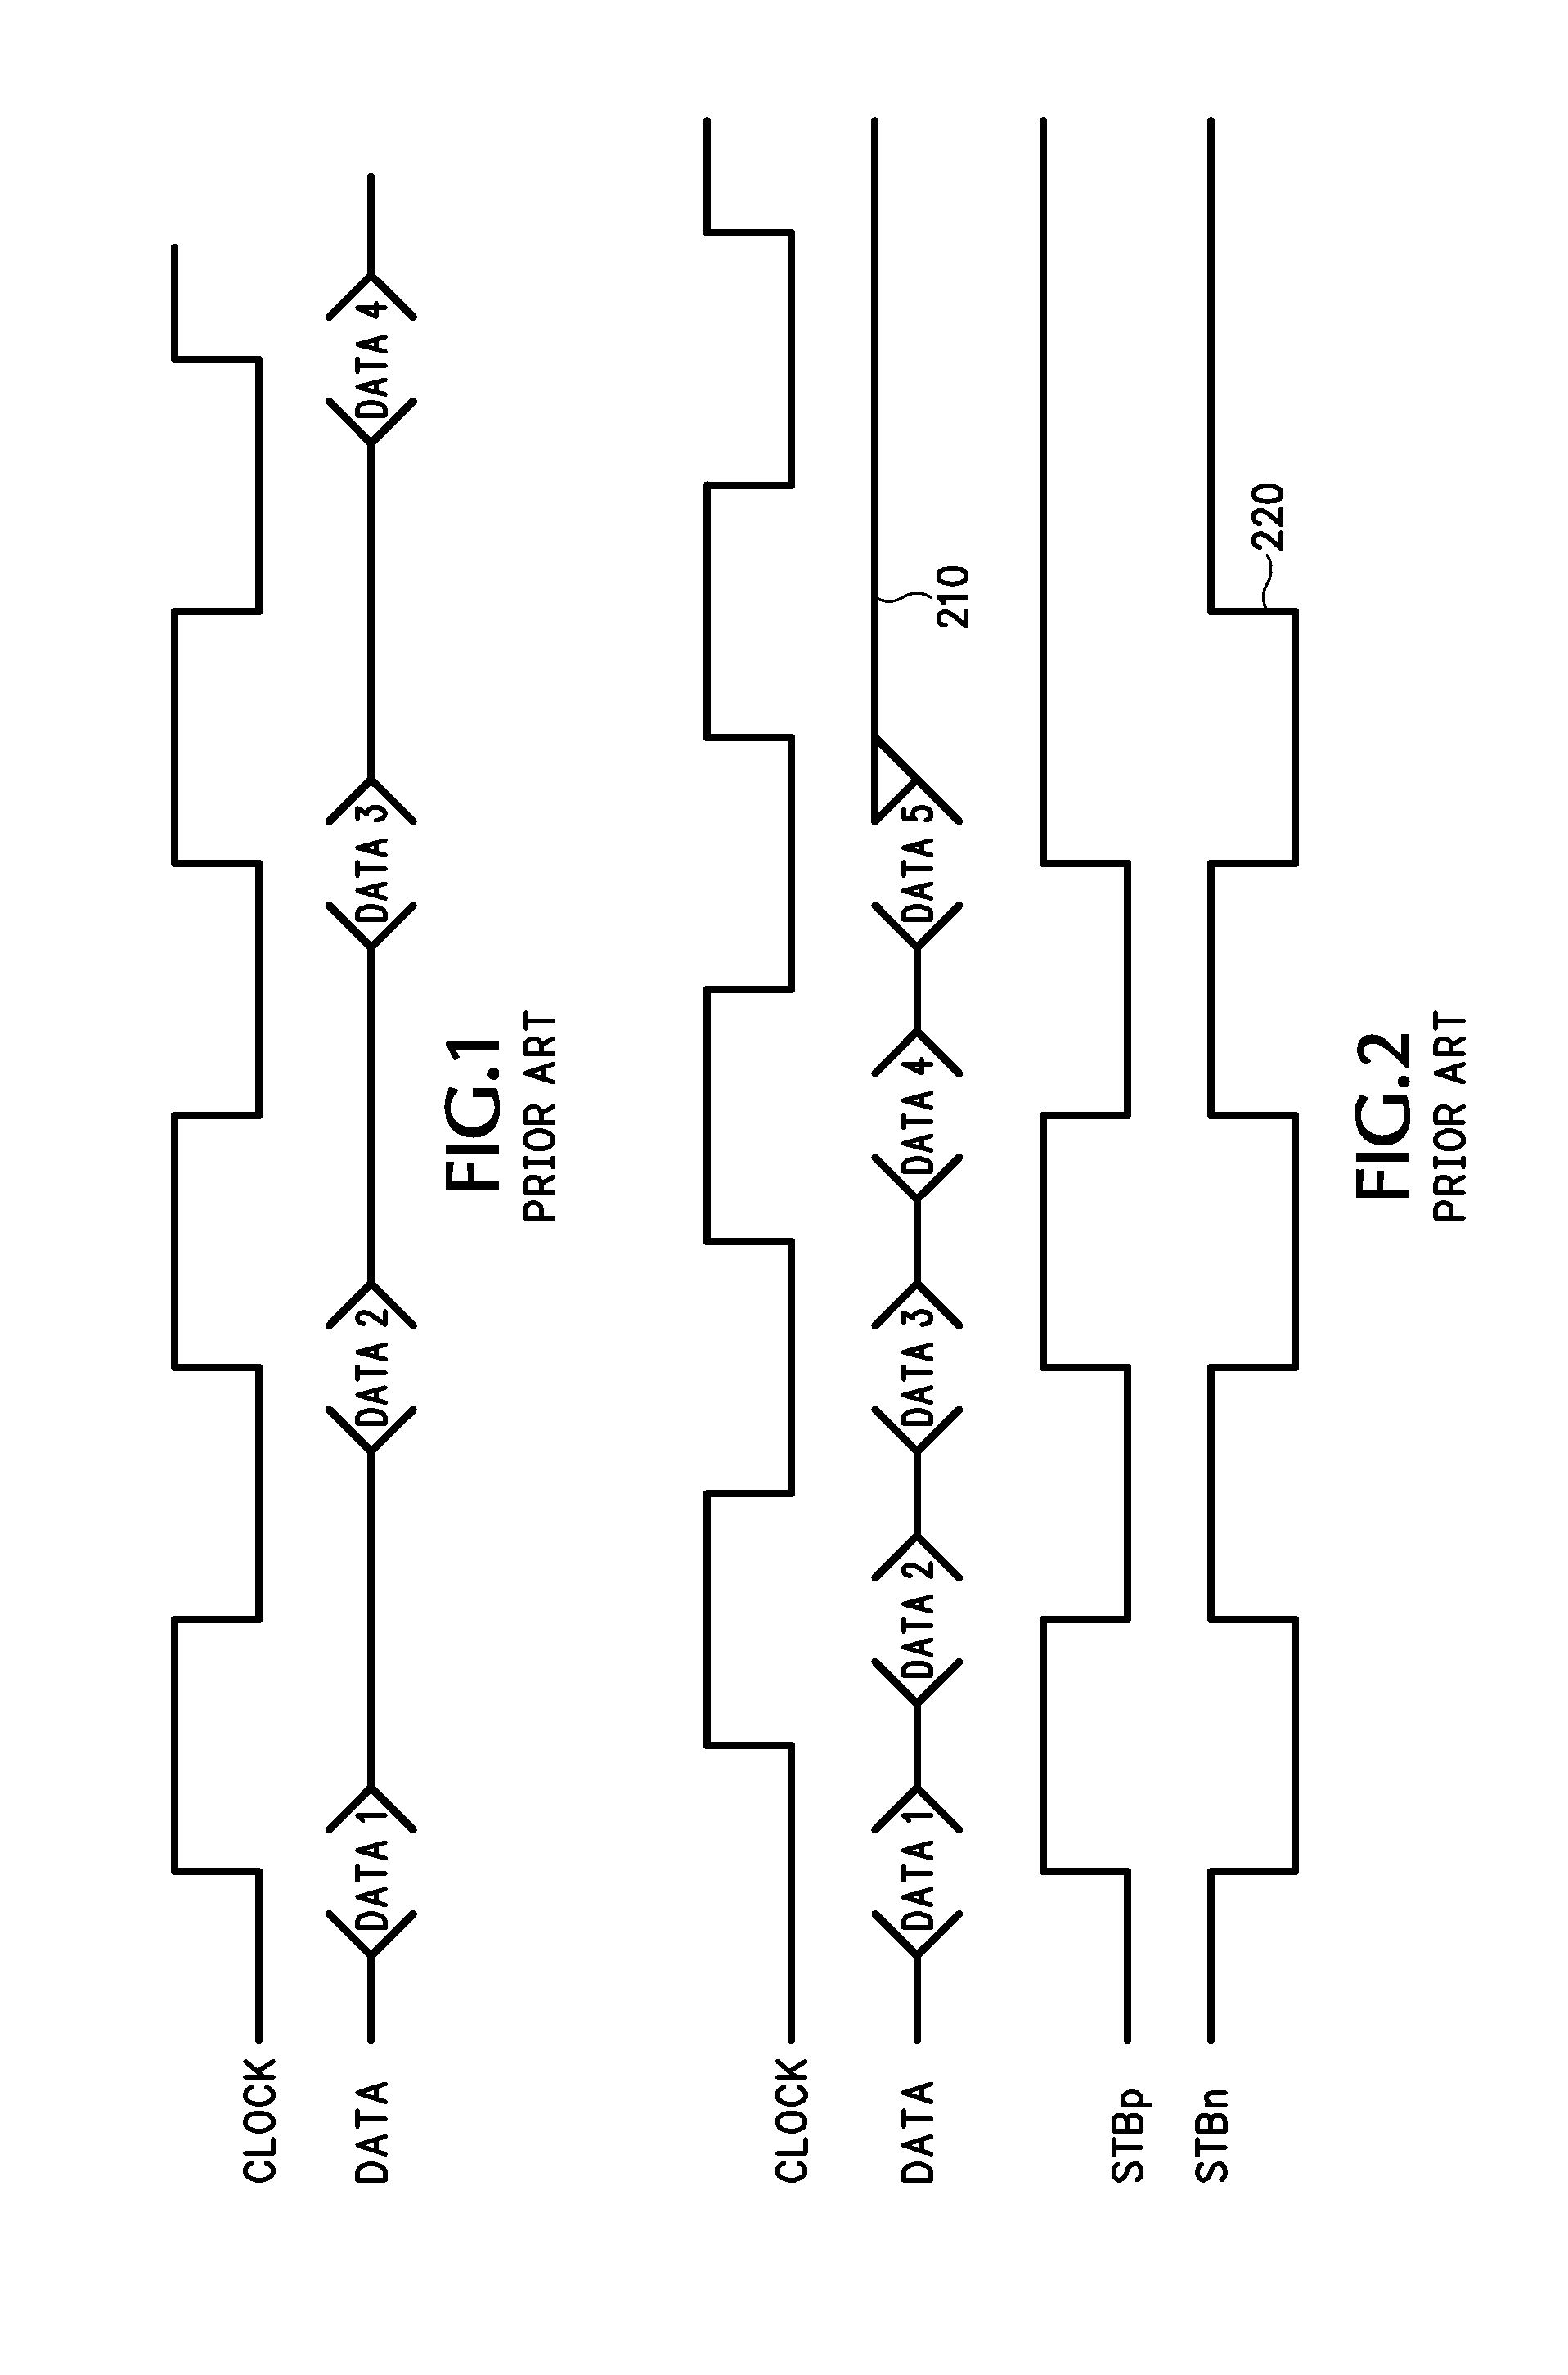 Method and apparatus for probing a computer bus